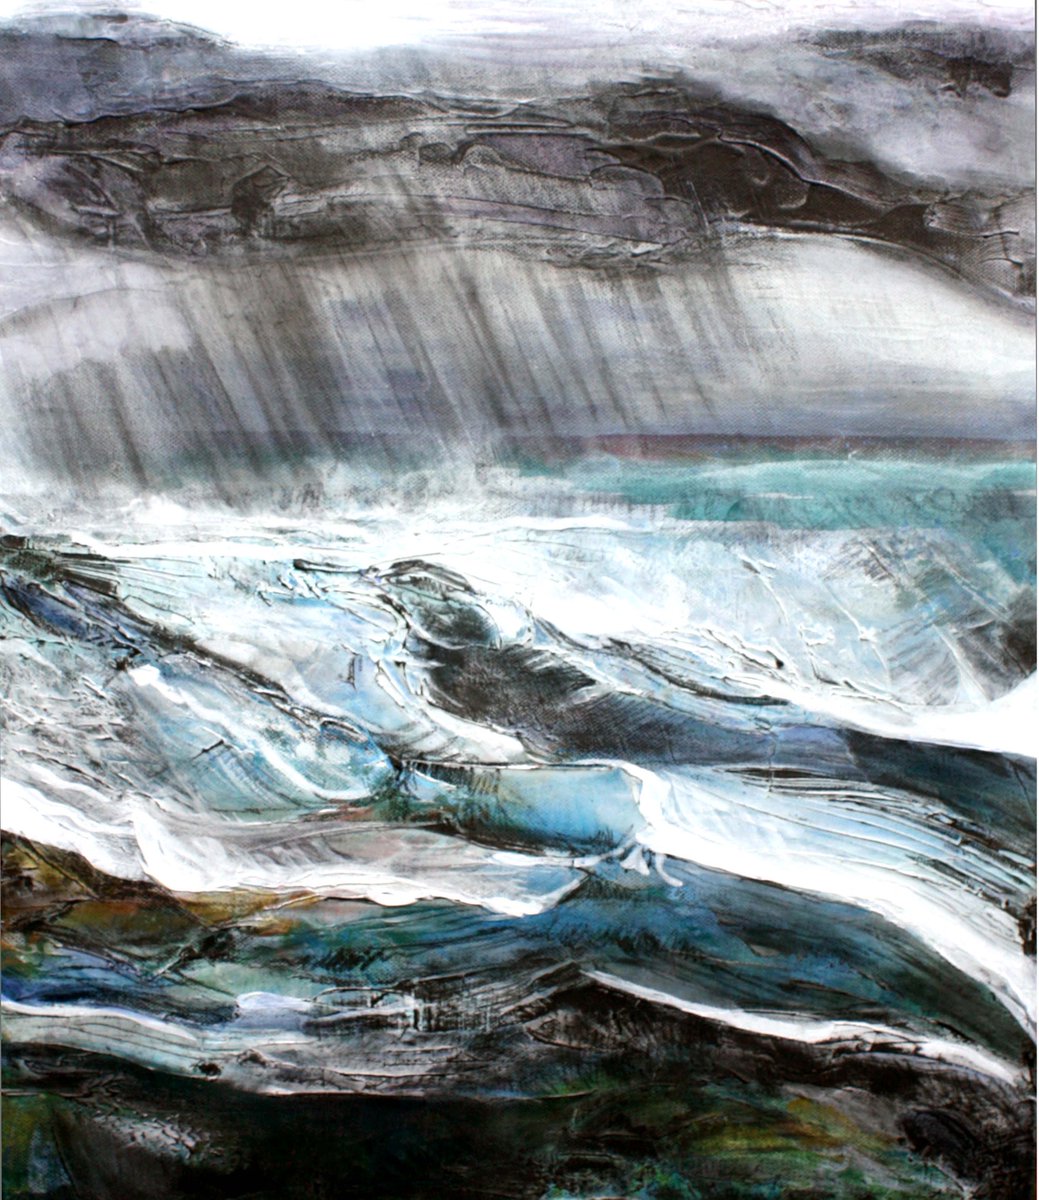 WET & WINDY day - good day to stay indoors and keep warm by the fire-  #rain #wet #stormy #fireside #trees #moody #miserable #seascape #landscape #SaturdayVibes  #stormysea #stormysky #badweather #ruthmcdonald #painterprintmaker #artistsonX #artwork #painting #art #cloudy #coast